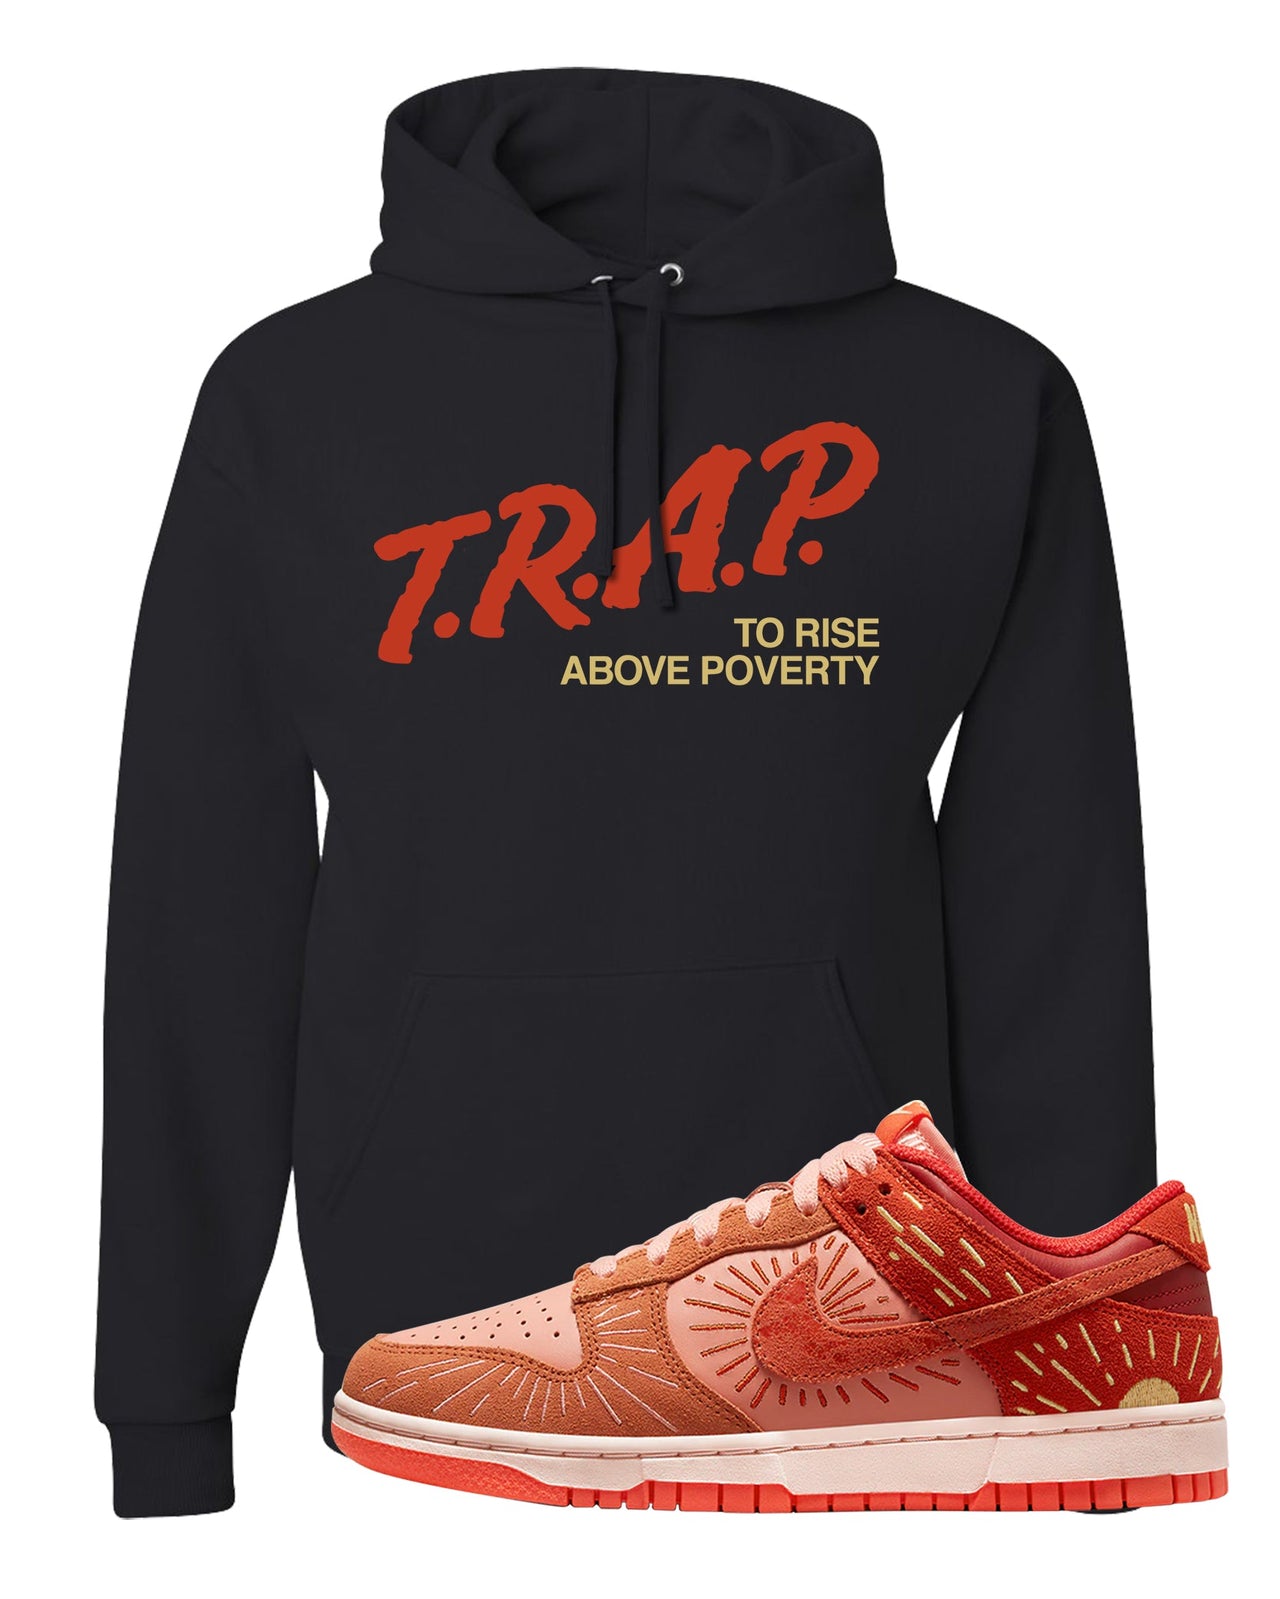 Solstice Low Dunks Hoodie | Trap To Rise Above Poverty, Black